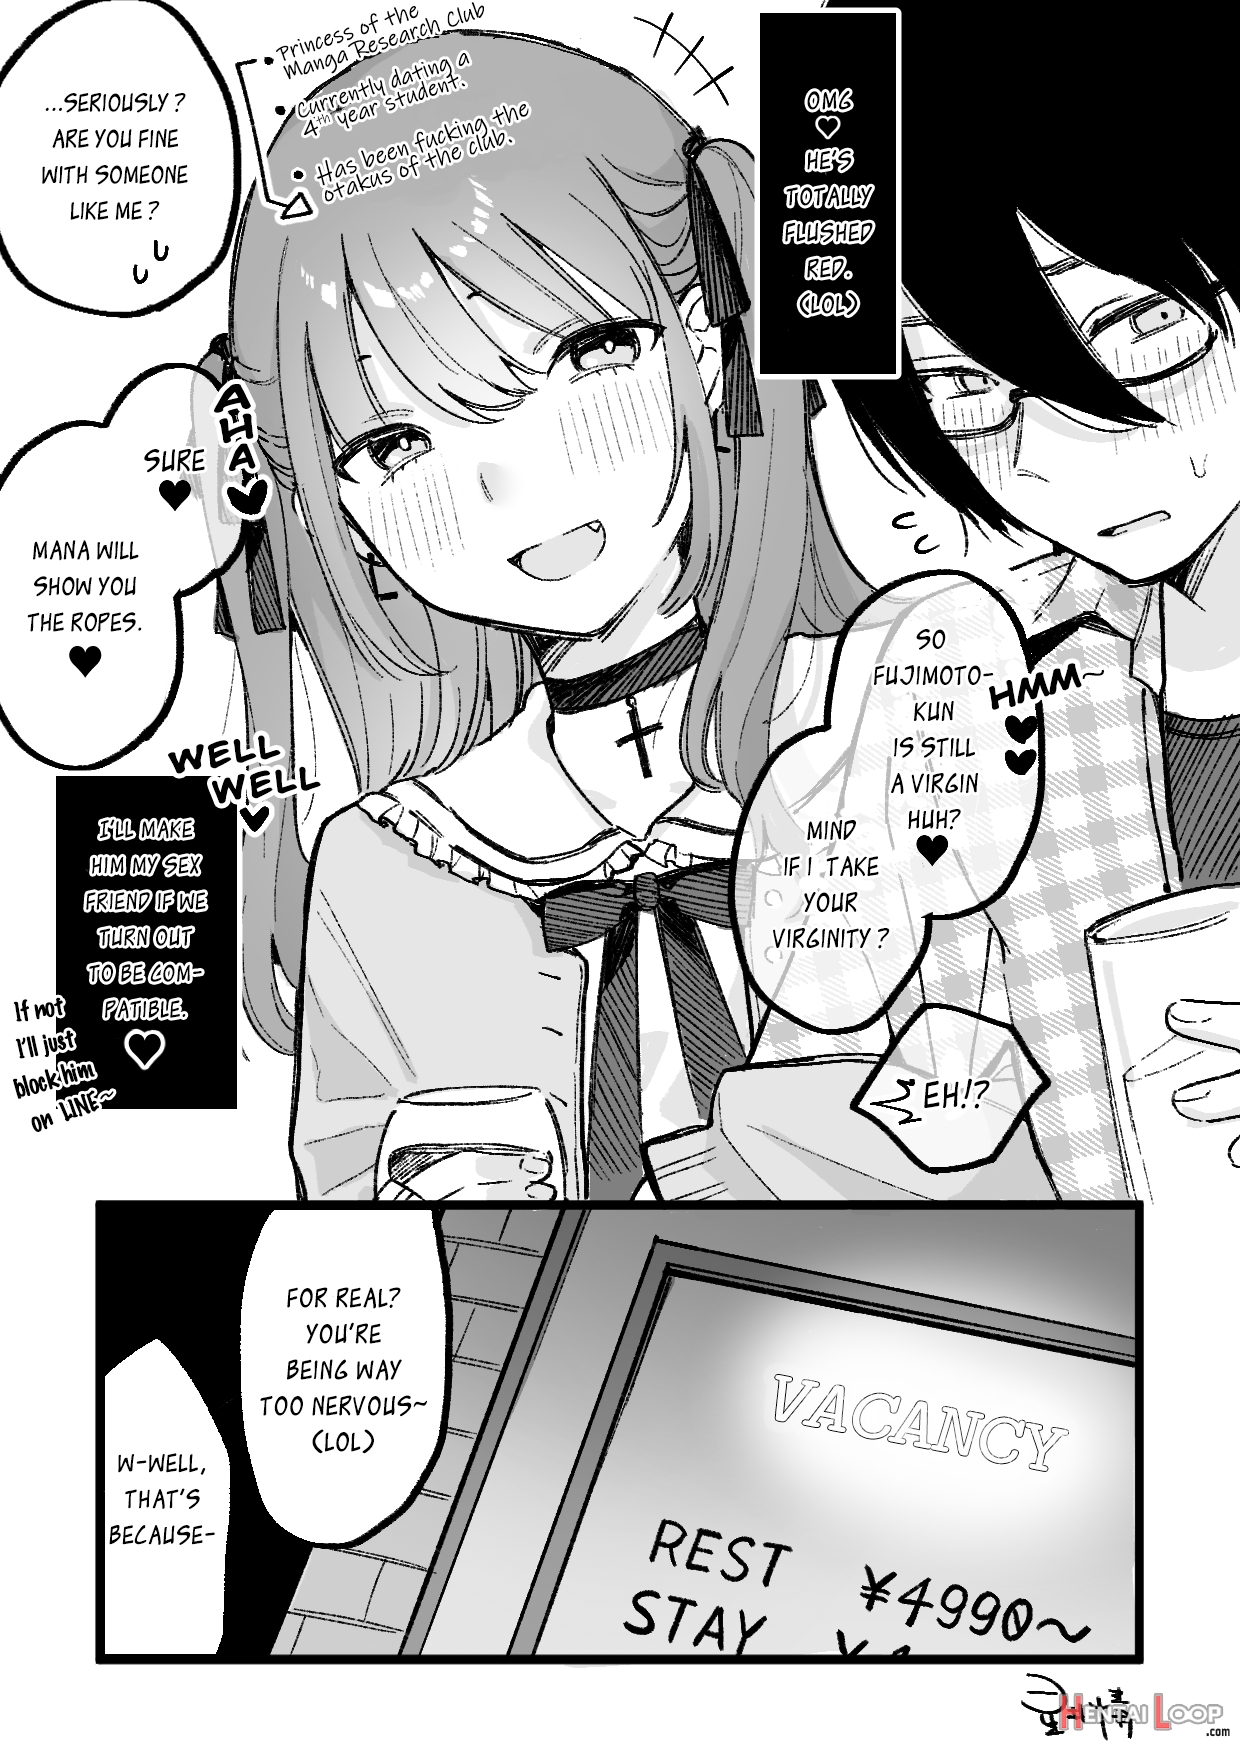 Hime-chan Total Defeat + Hime-chan Returns. page 1